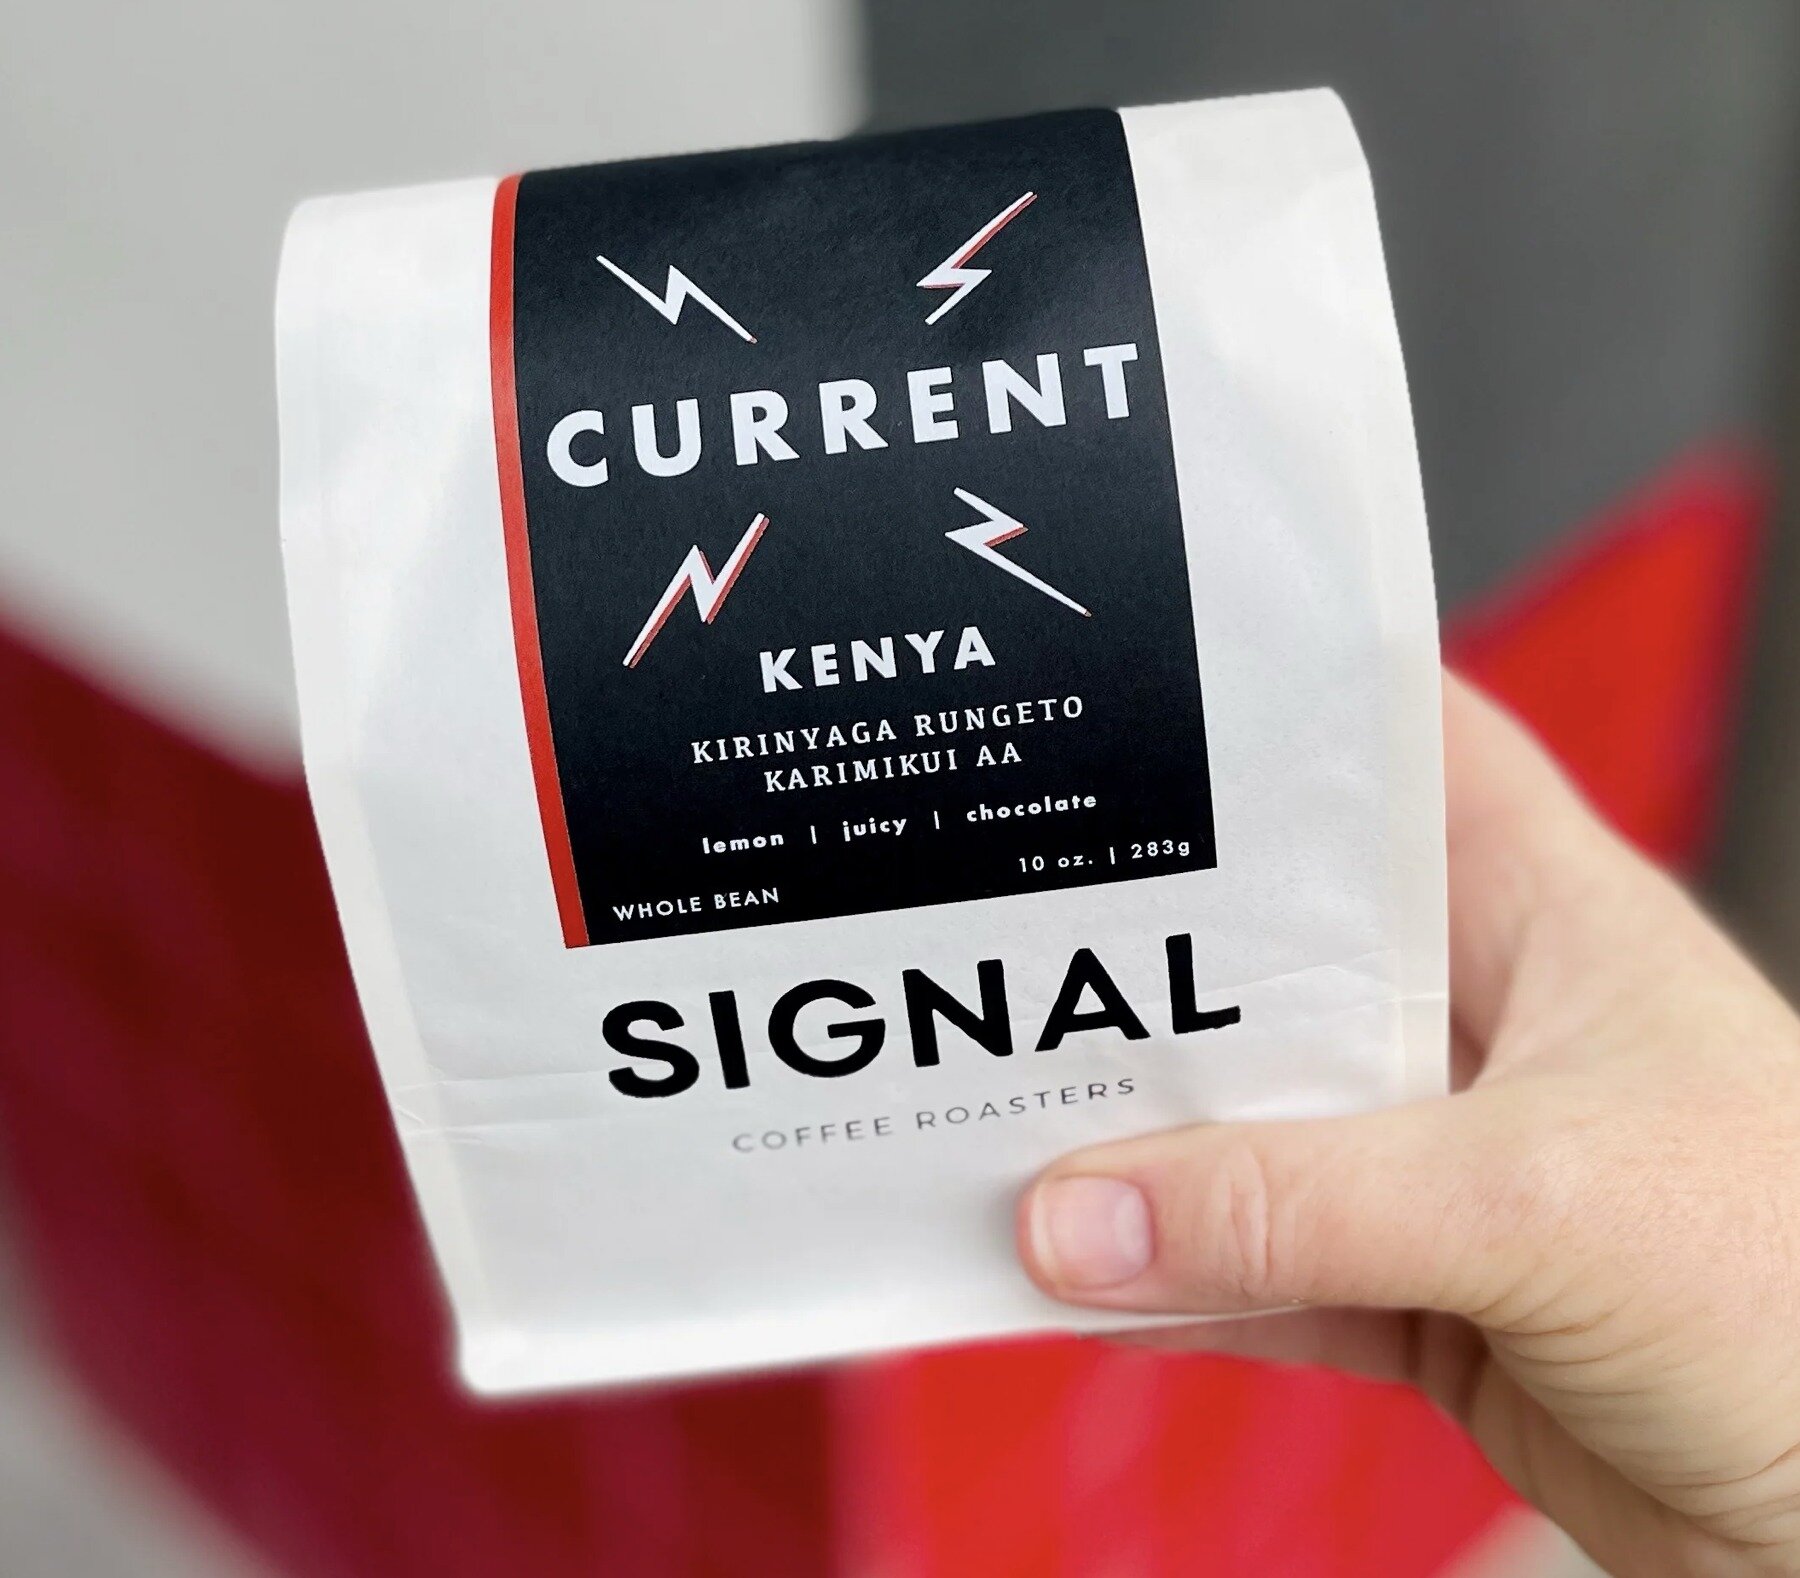 Delicious, satisfying, and uncompromising coffee that is easy to love. Shipped worldwide from the San Francisco Bay Area!

signalcoffeeonline.com
2318A Central Avenue
SIGNAL Coffee Roasters 

#westalamedabusiness #westalamedabusinessassociation #alam